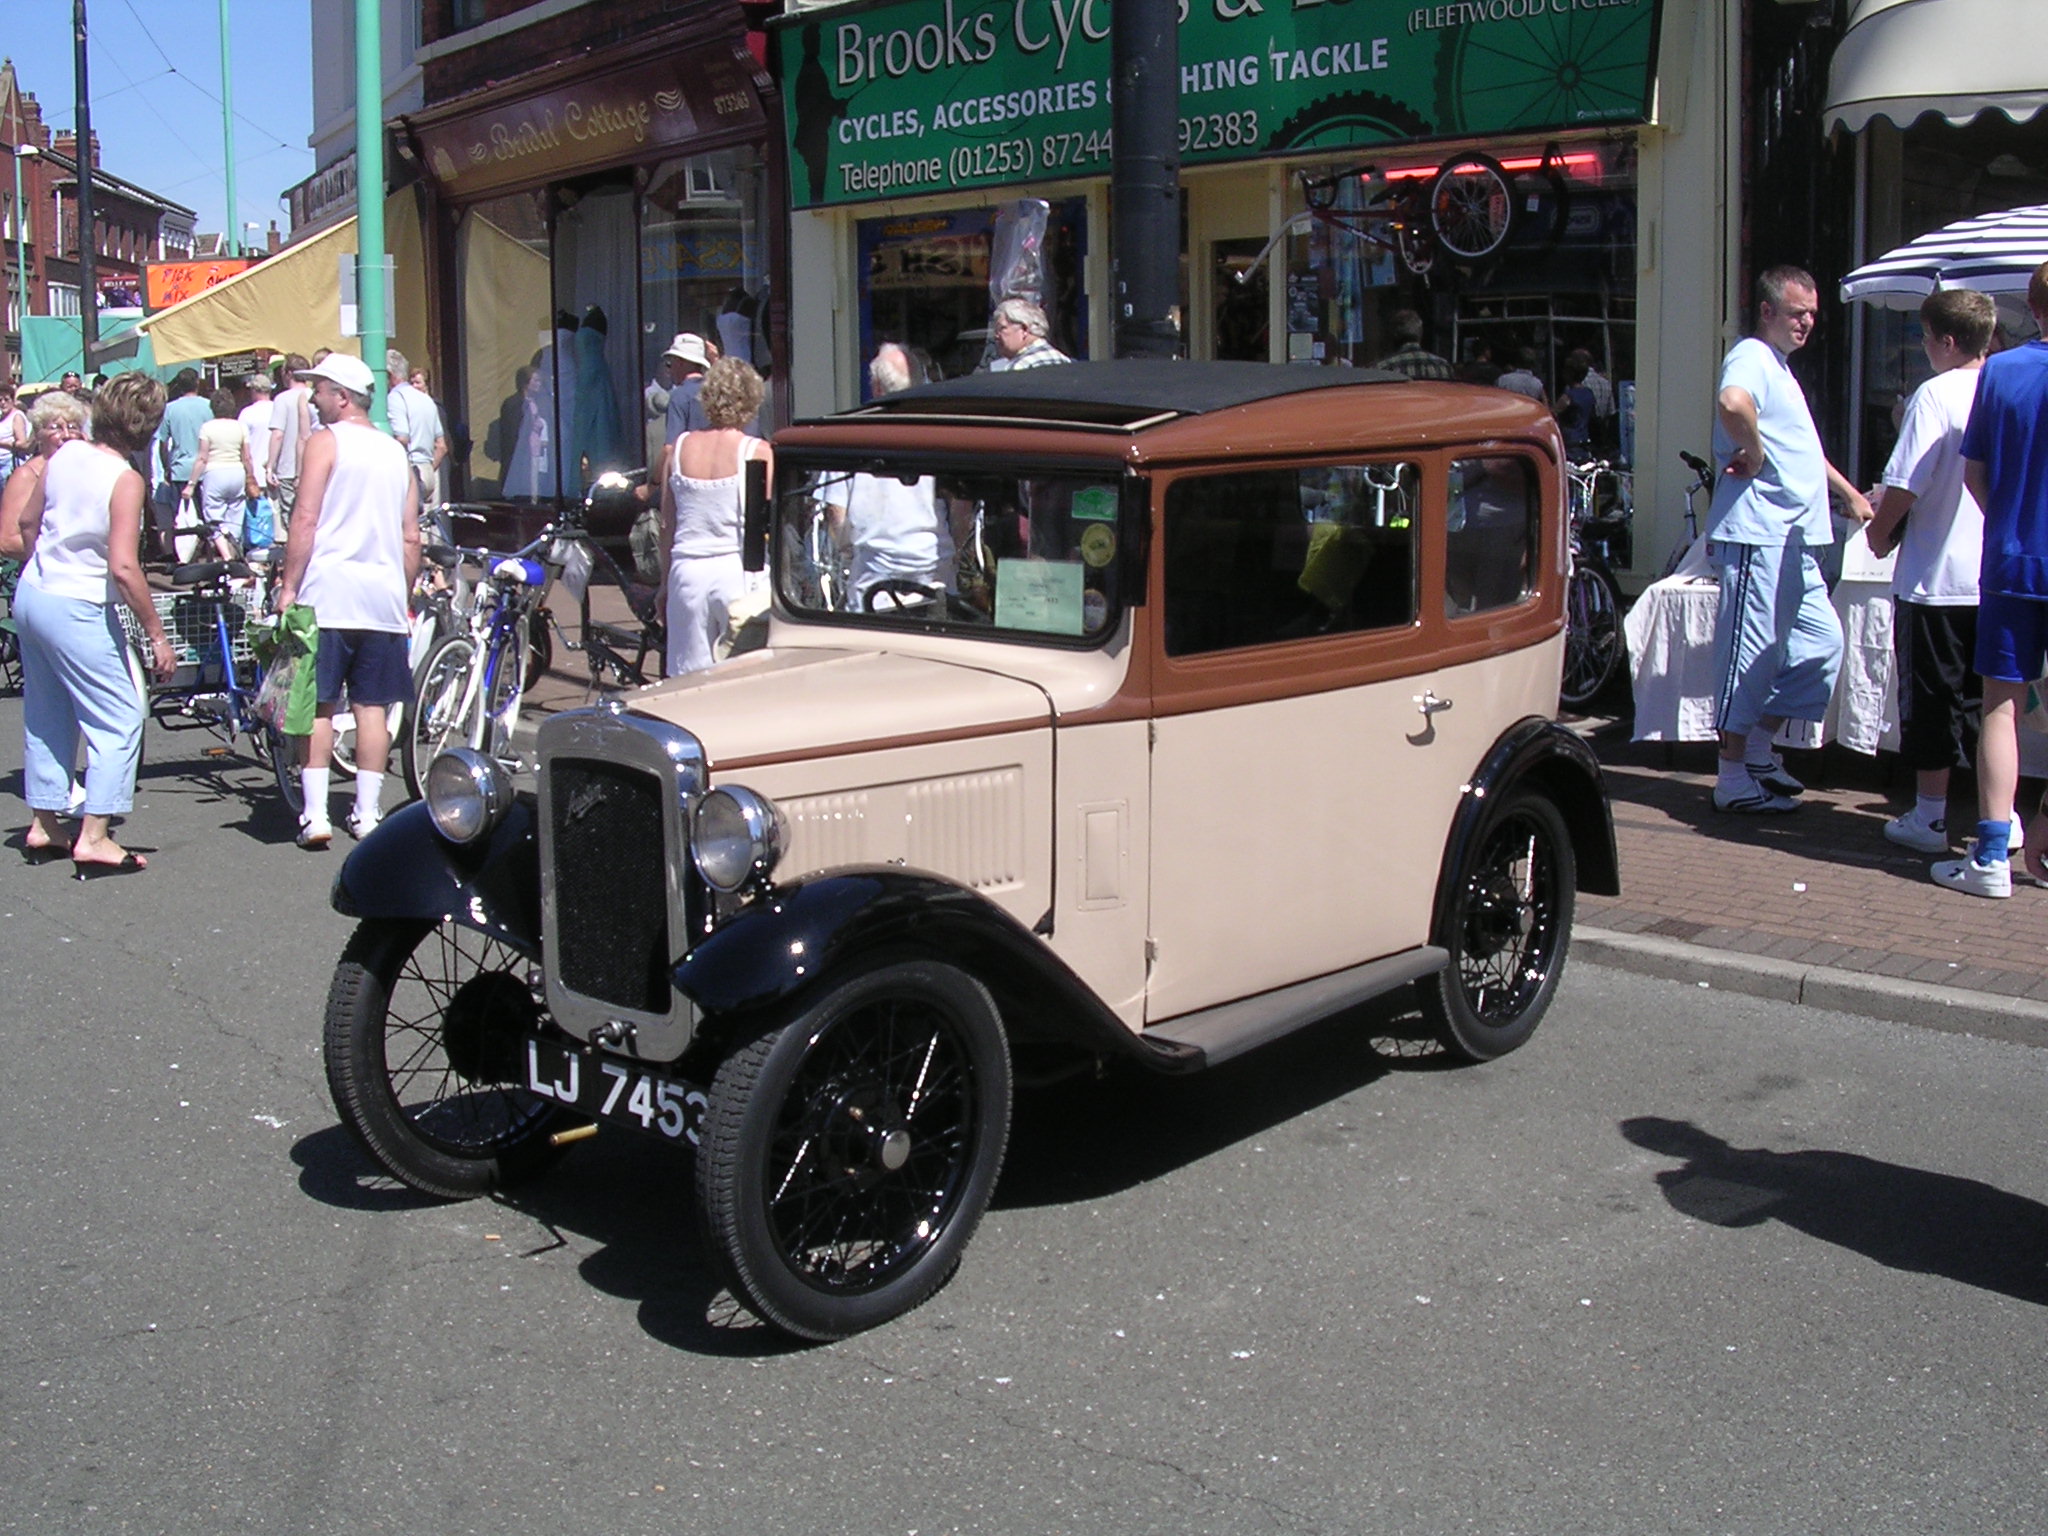 an antique car parked on the street in front of a group of people